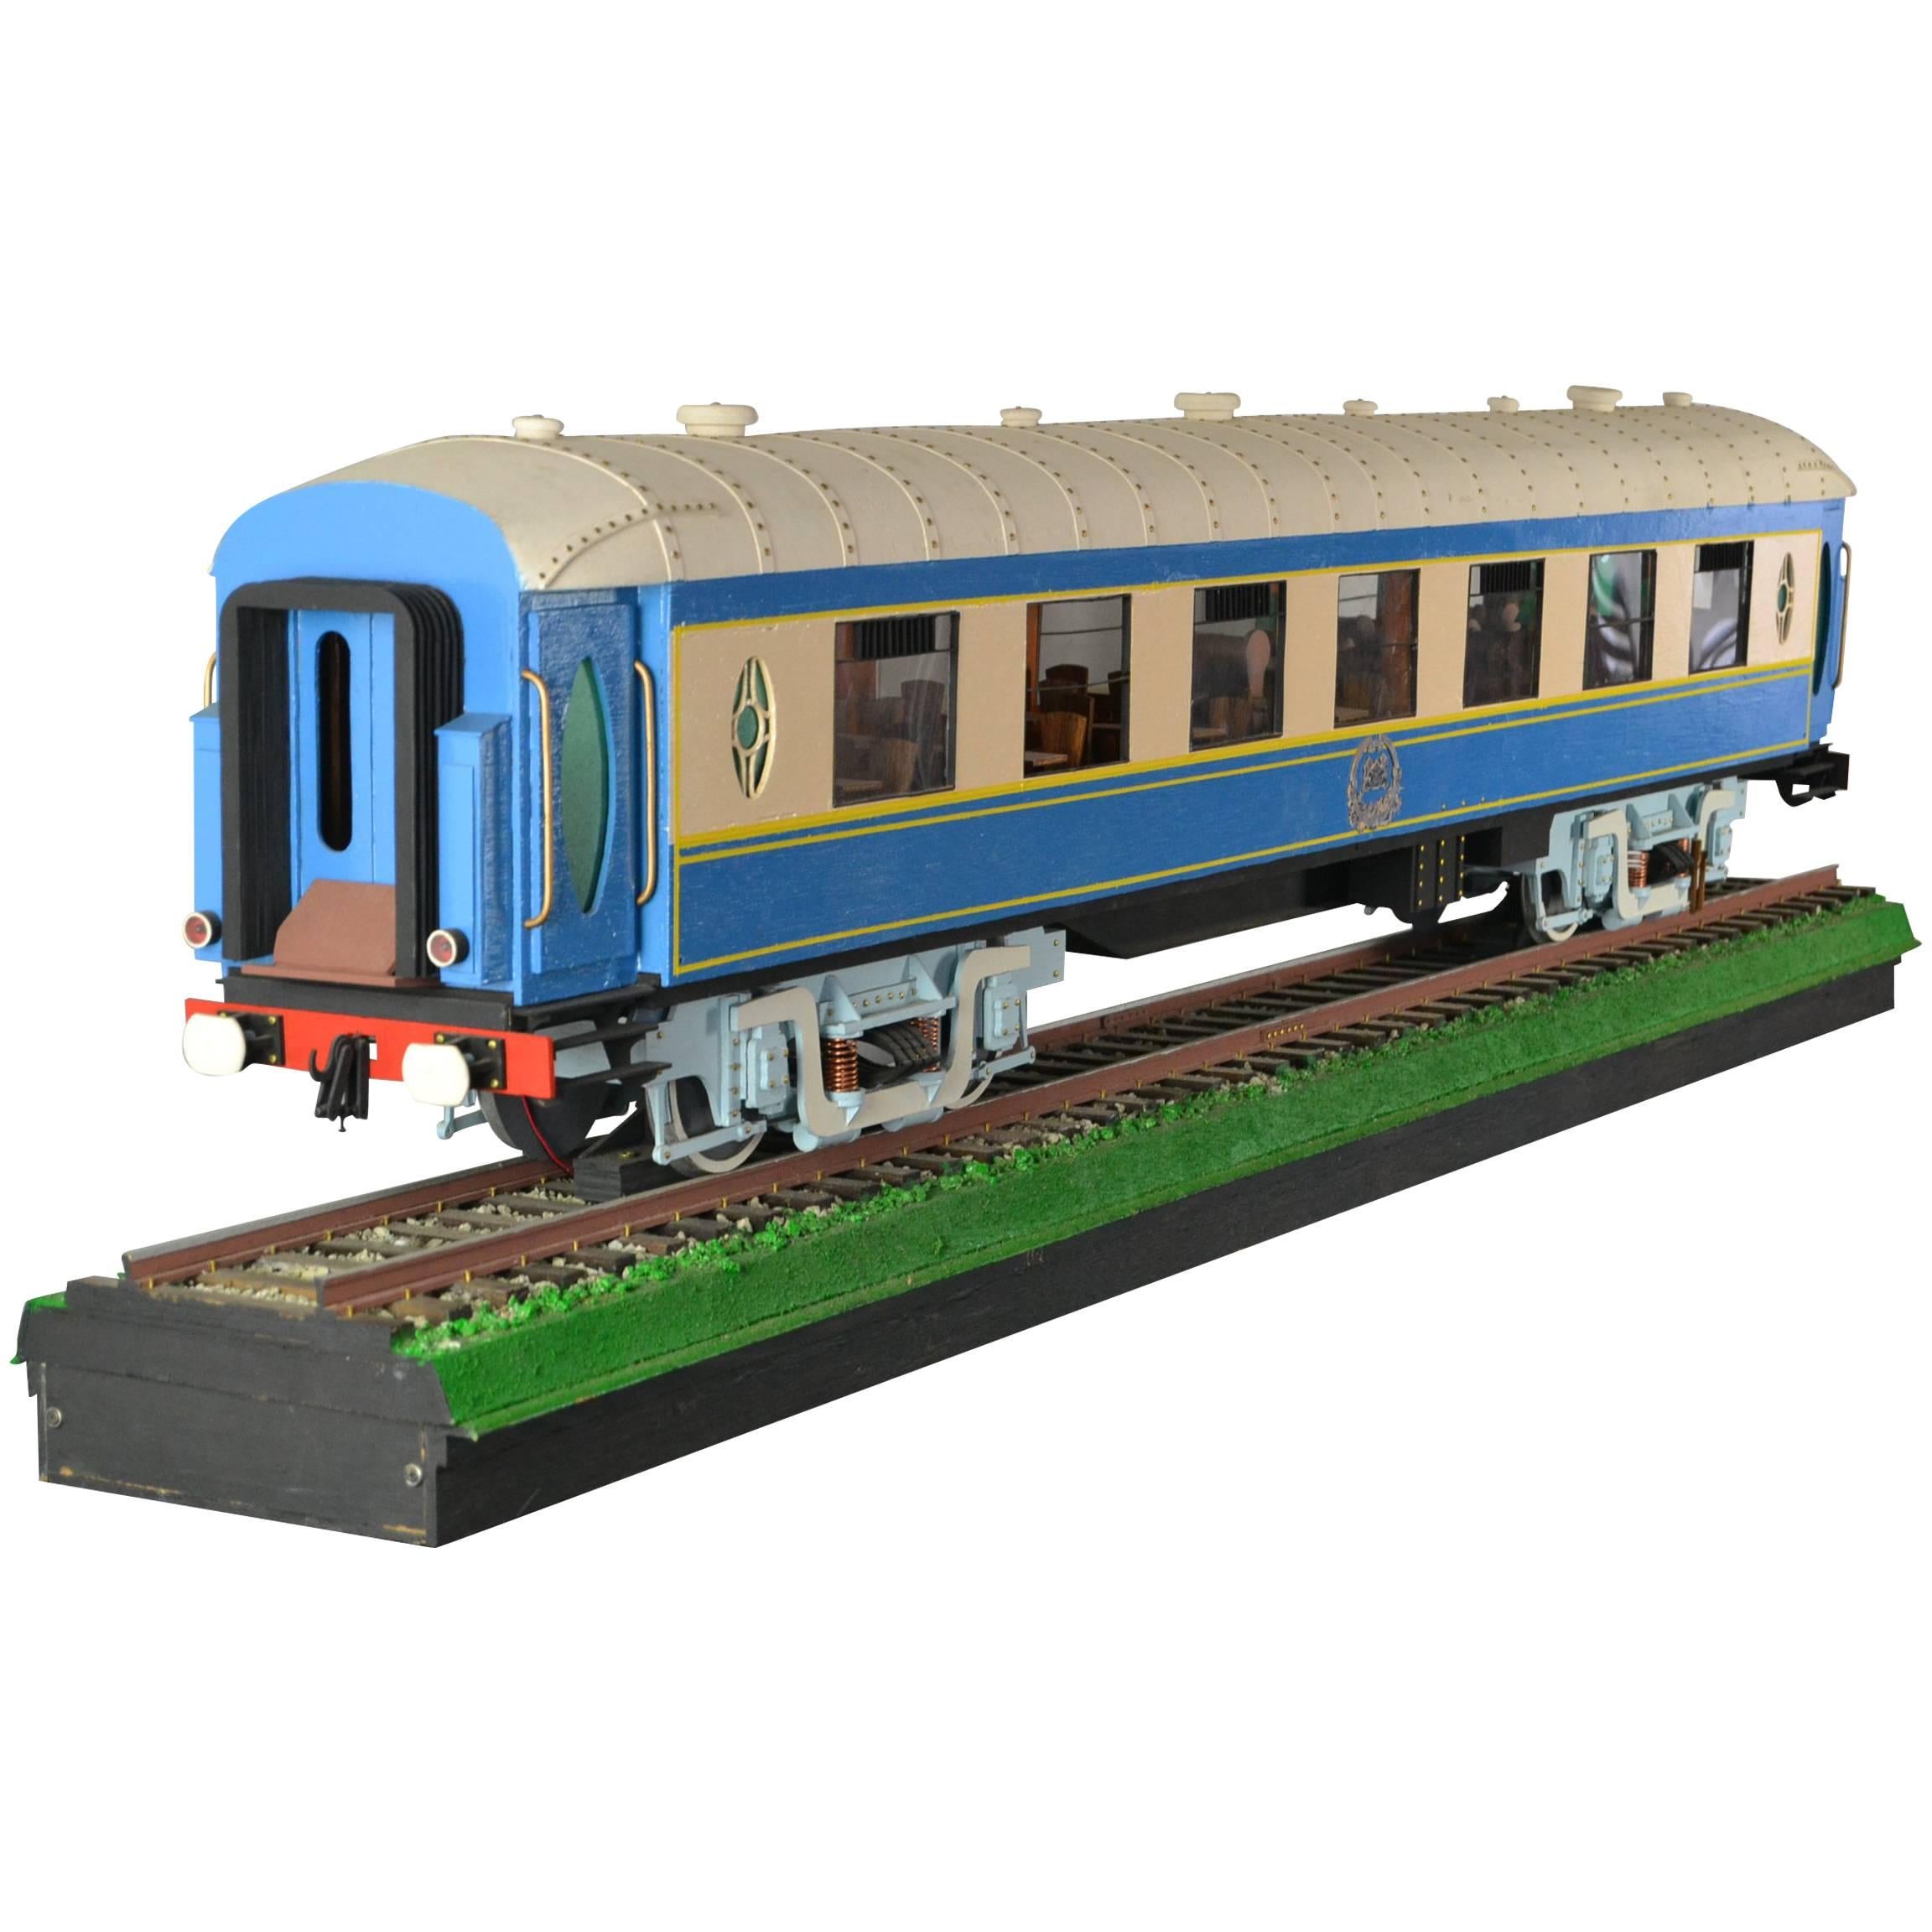 Large Model of the Orient Express Luxury Train at 1stDibs